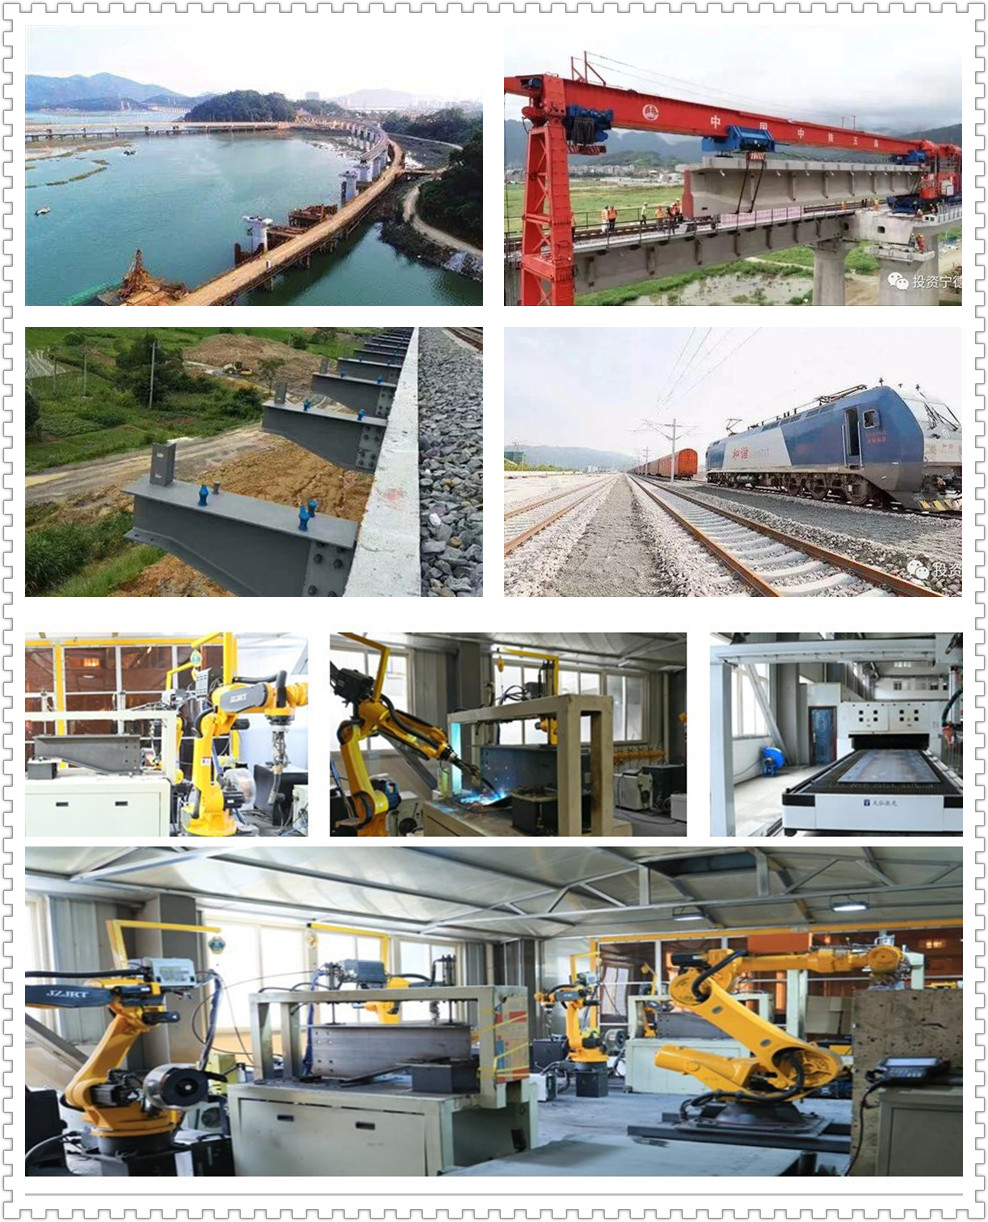 prestressed concrete simply supported T-Steel beam for railway bridge manufacturer from China--Anyang Railway Equipment Co., Ltd